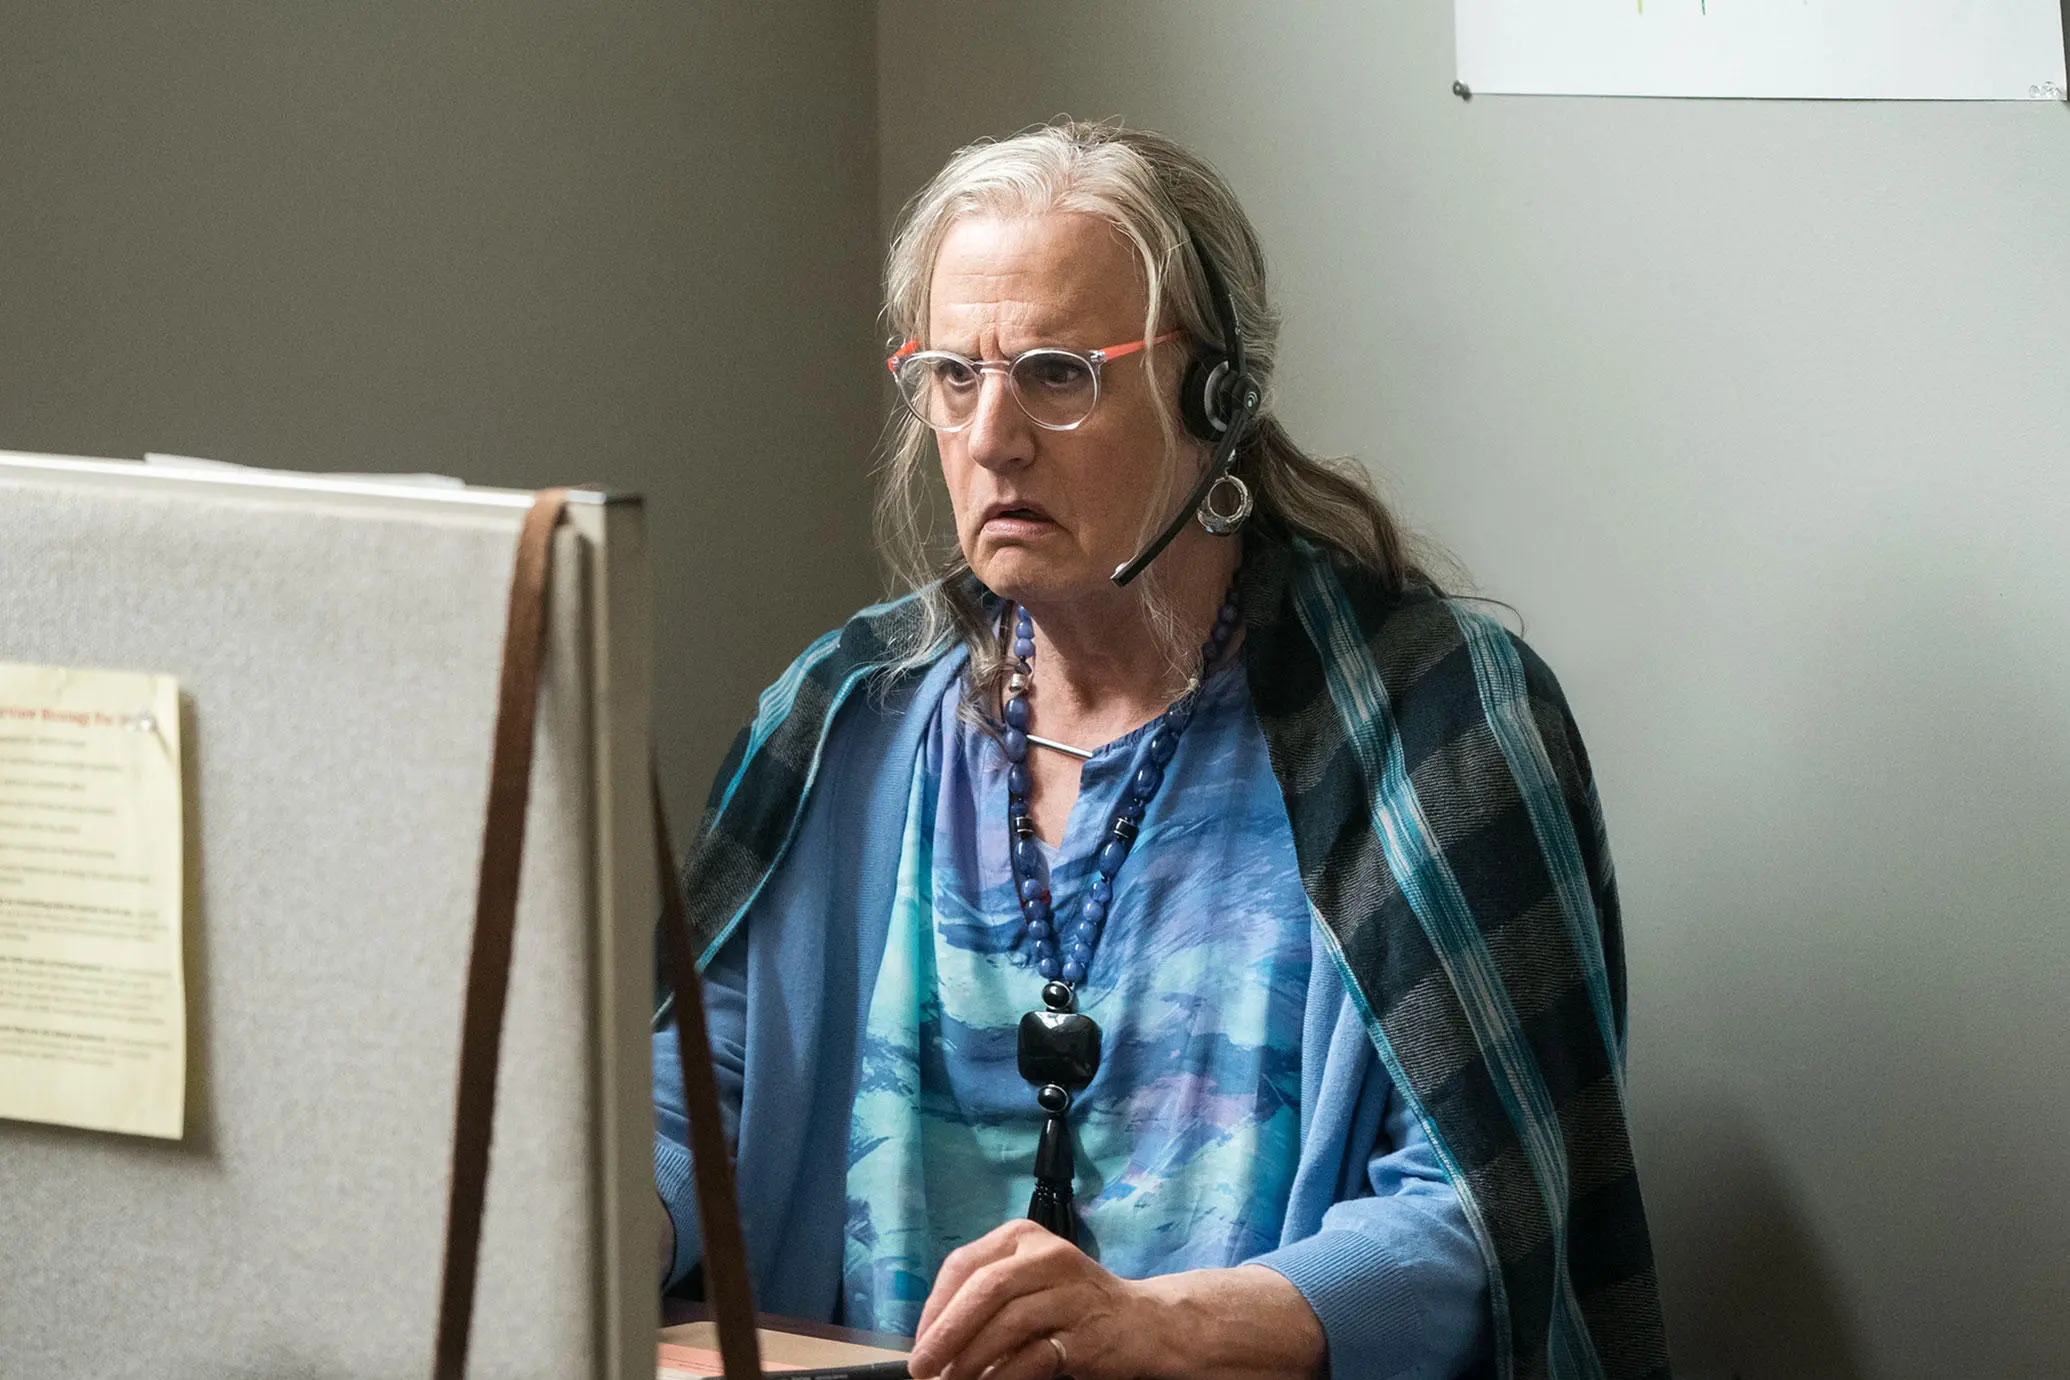 Transparent will return to TV as a musical